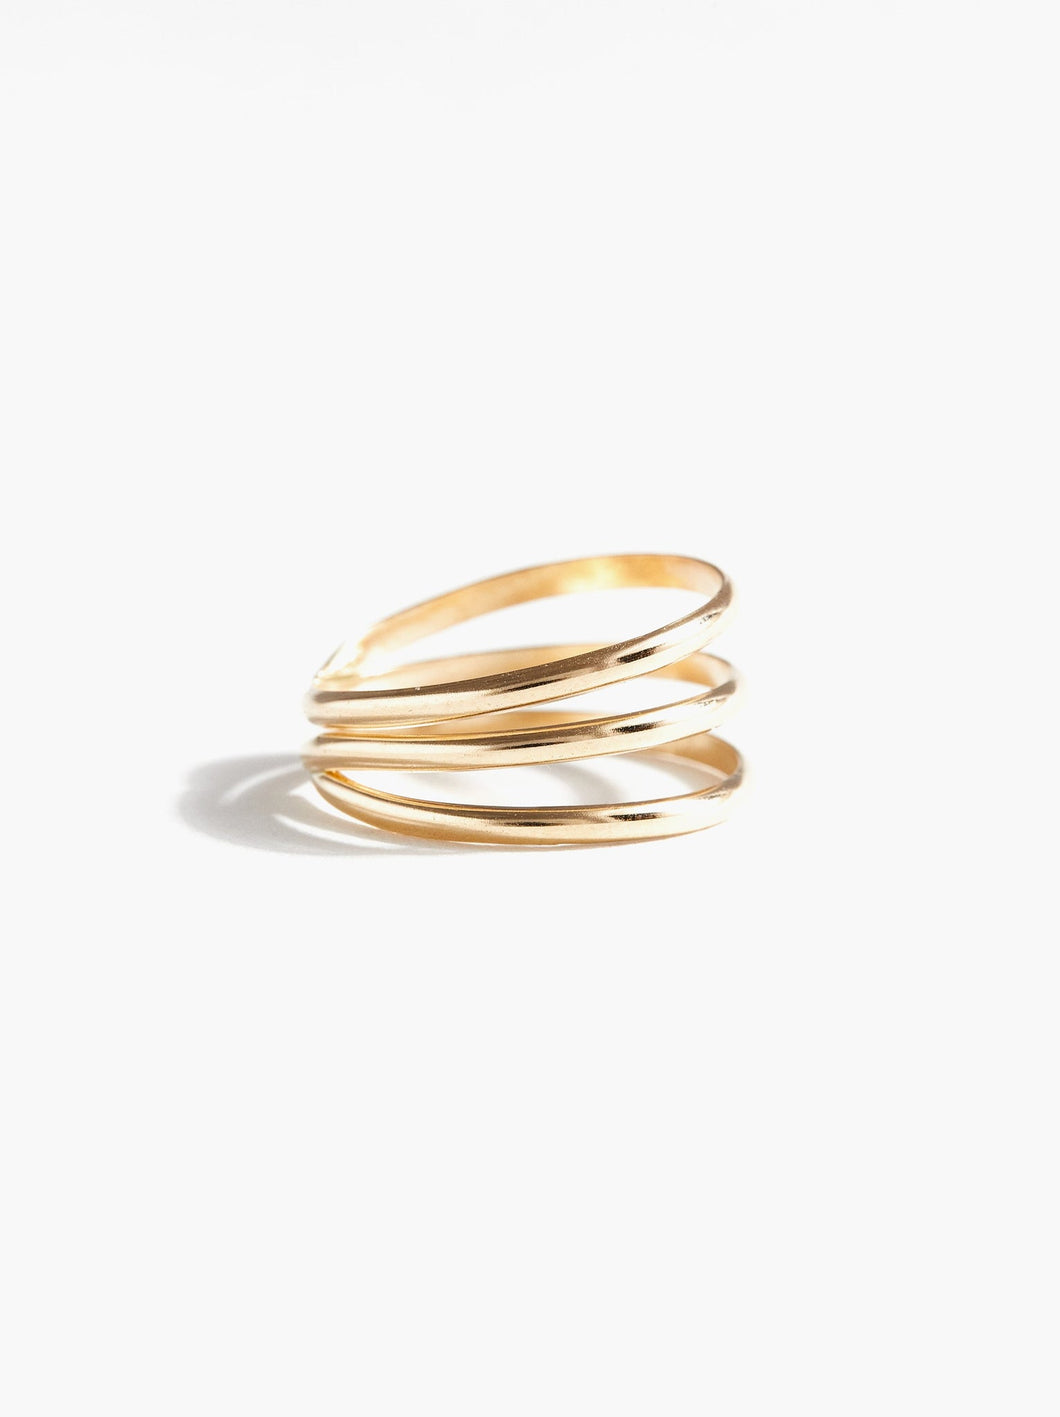 ABLE Contour Ring